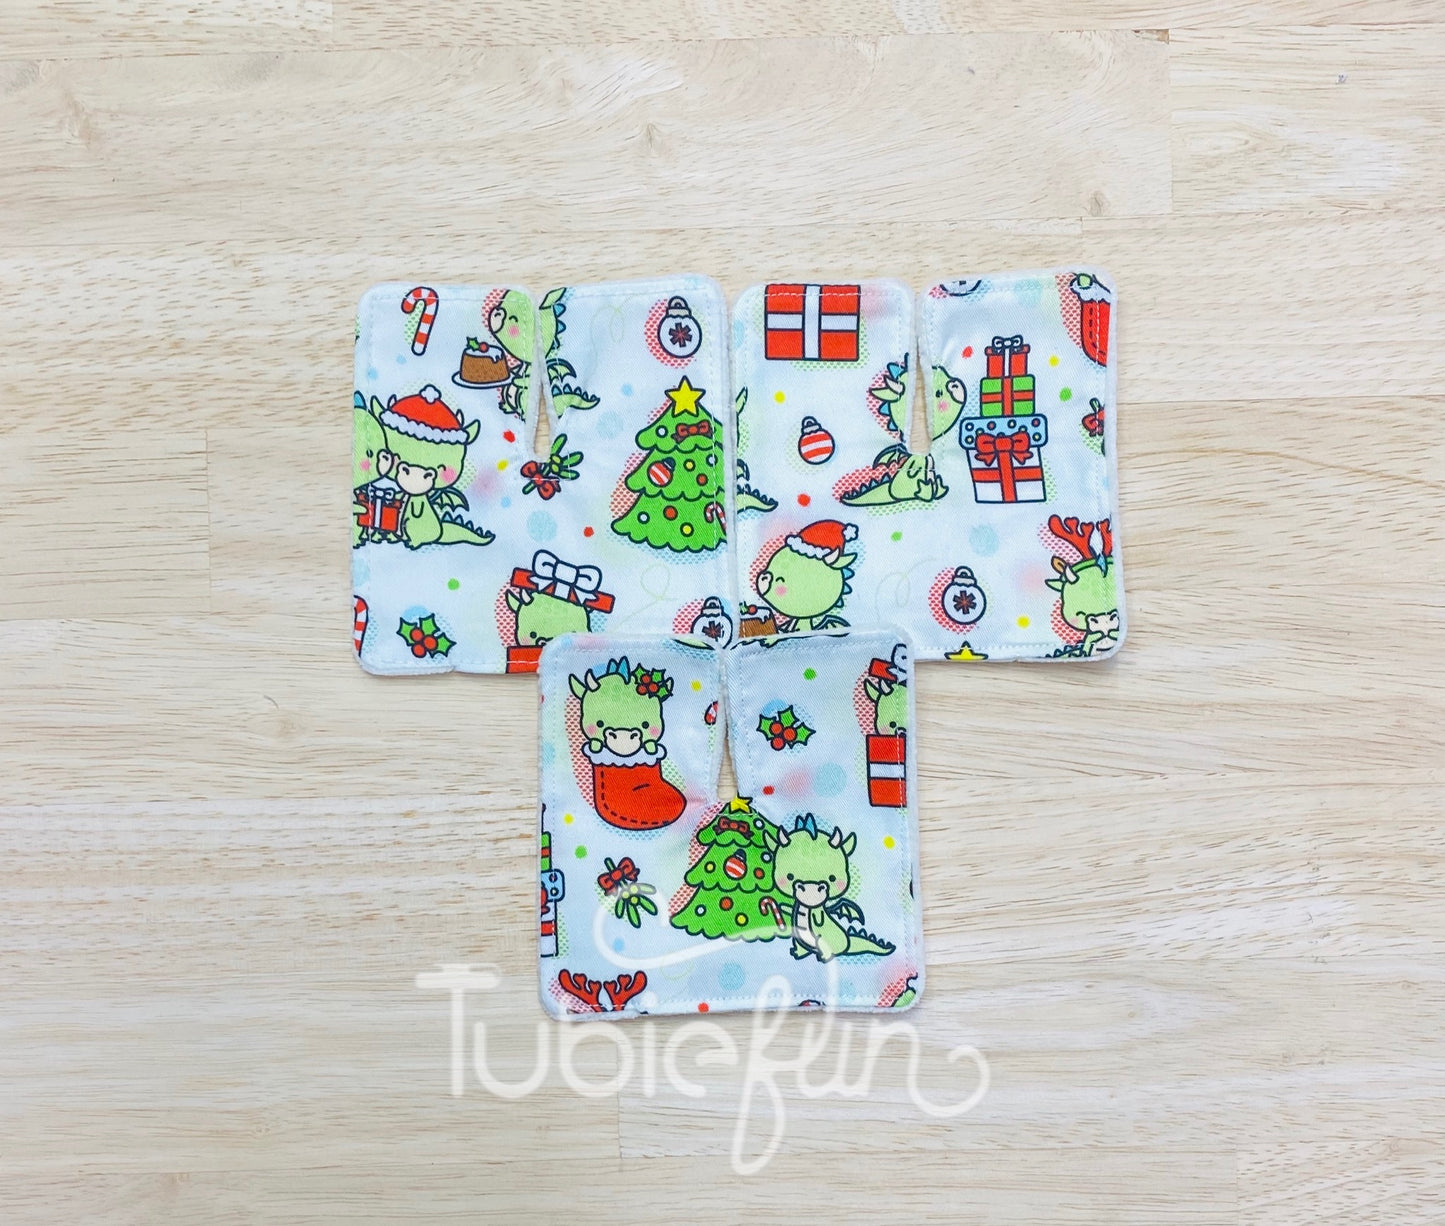 Tracheostomy Pad Cover - Christmas Dinosaurs with Trees